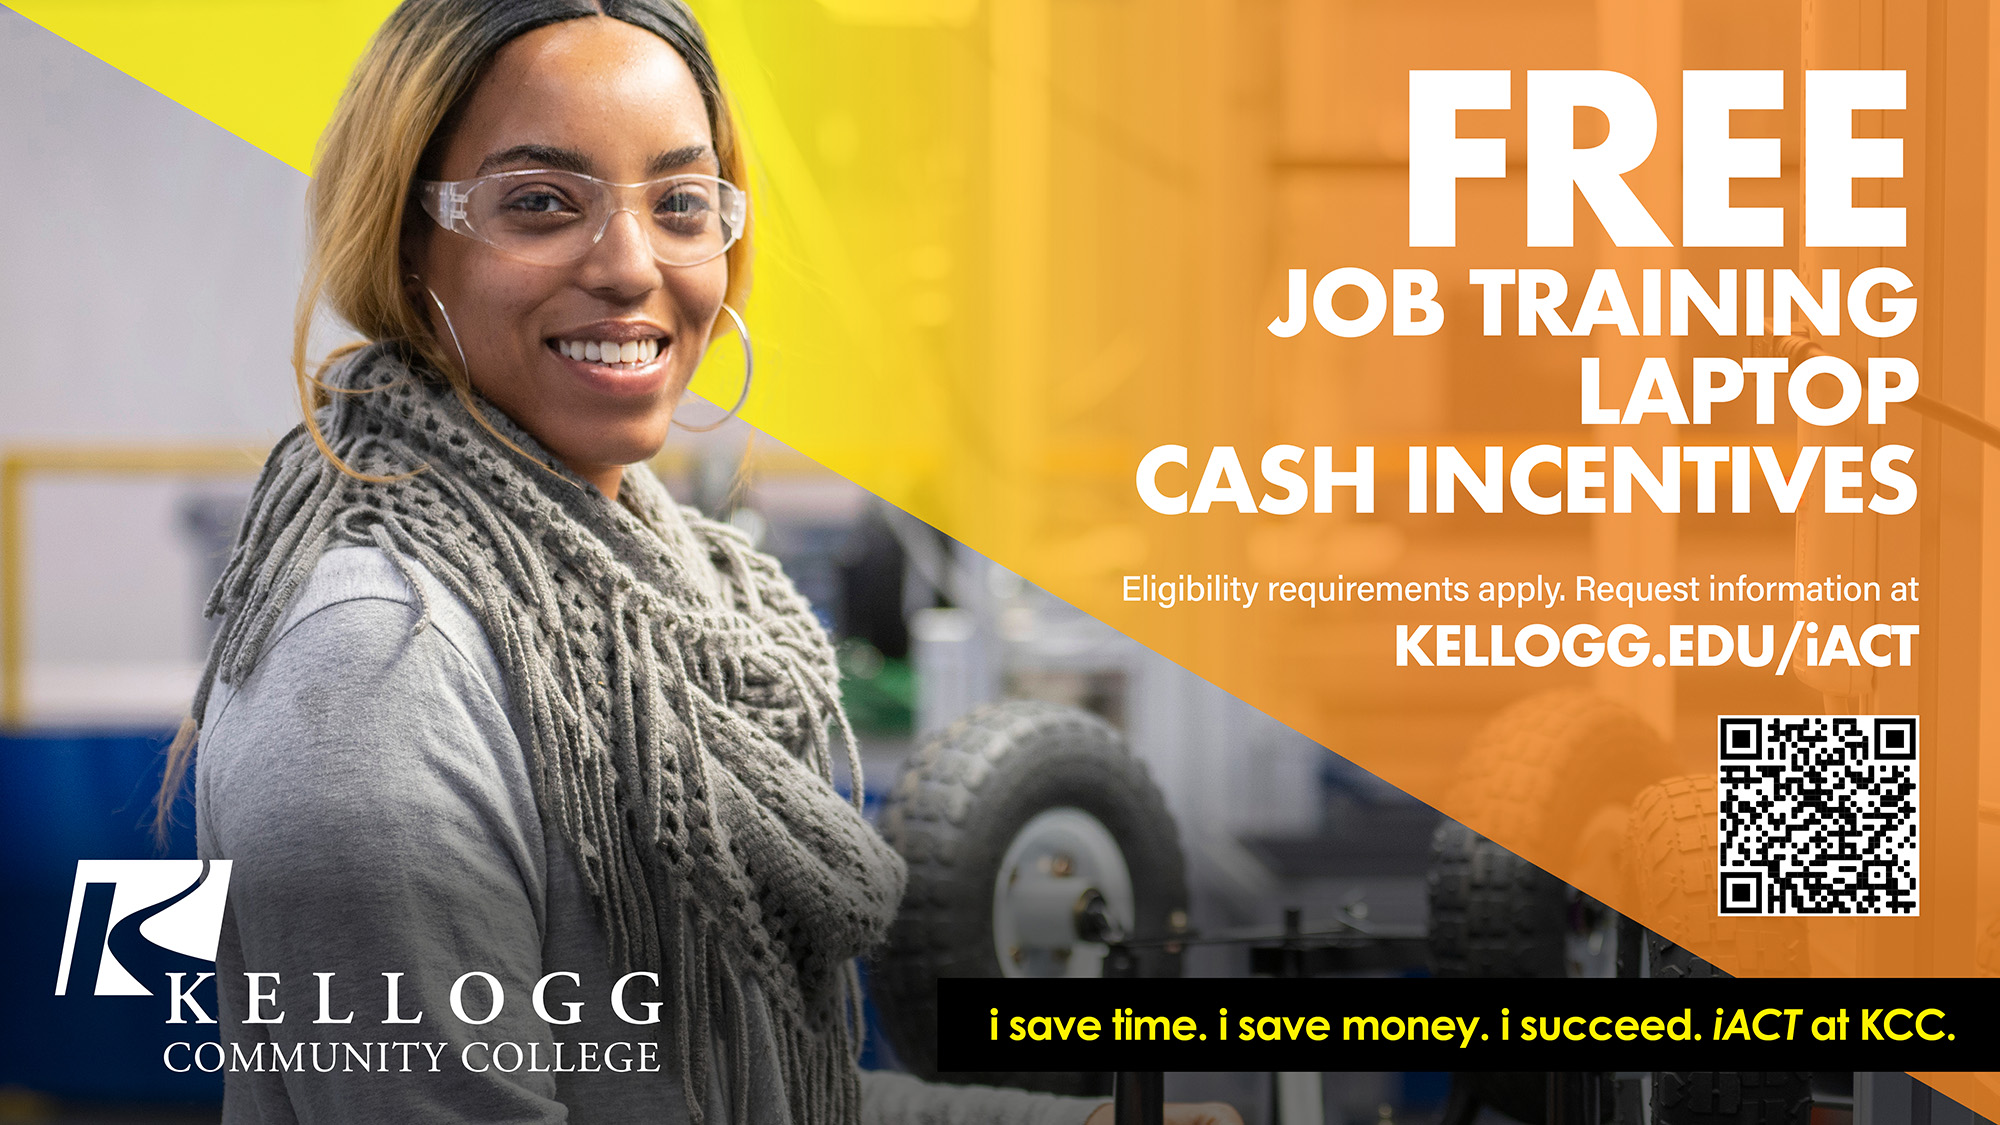 A female student smiles in safety goggles on a text slide that reads "Free job training, laptop, cash incentives. Eligibility requirements apply. Request information at www.kellogg.edu/iact."